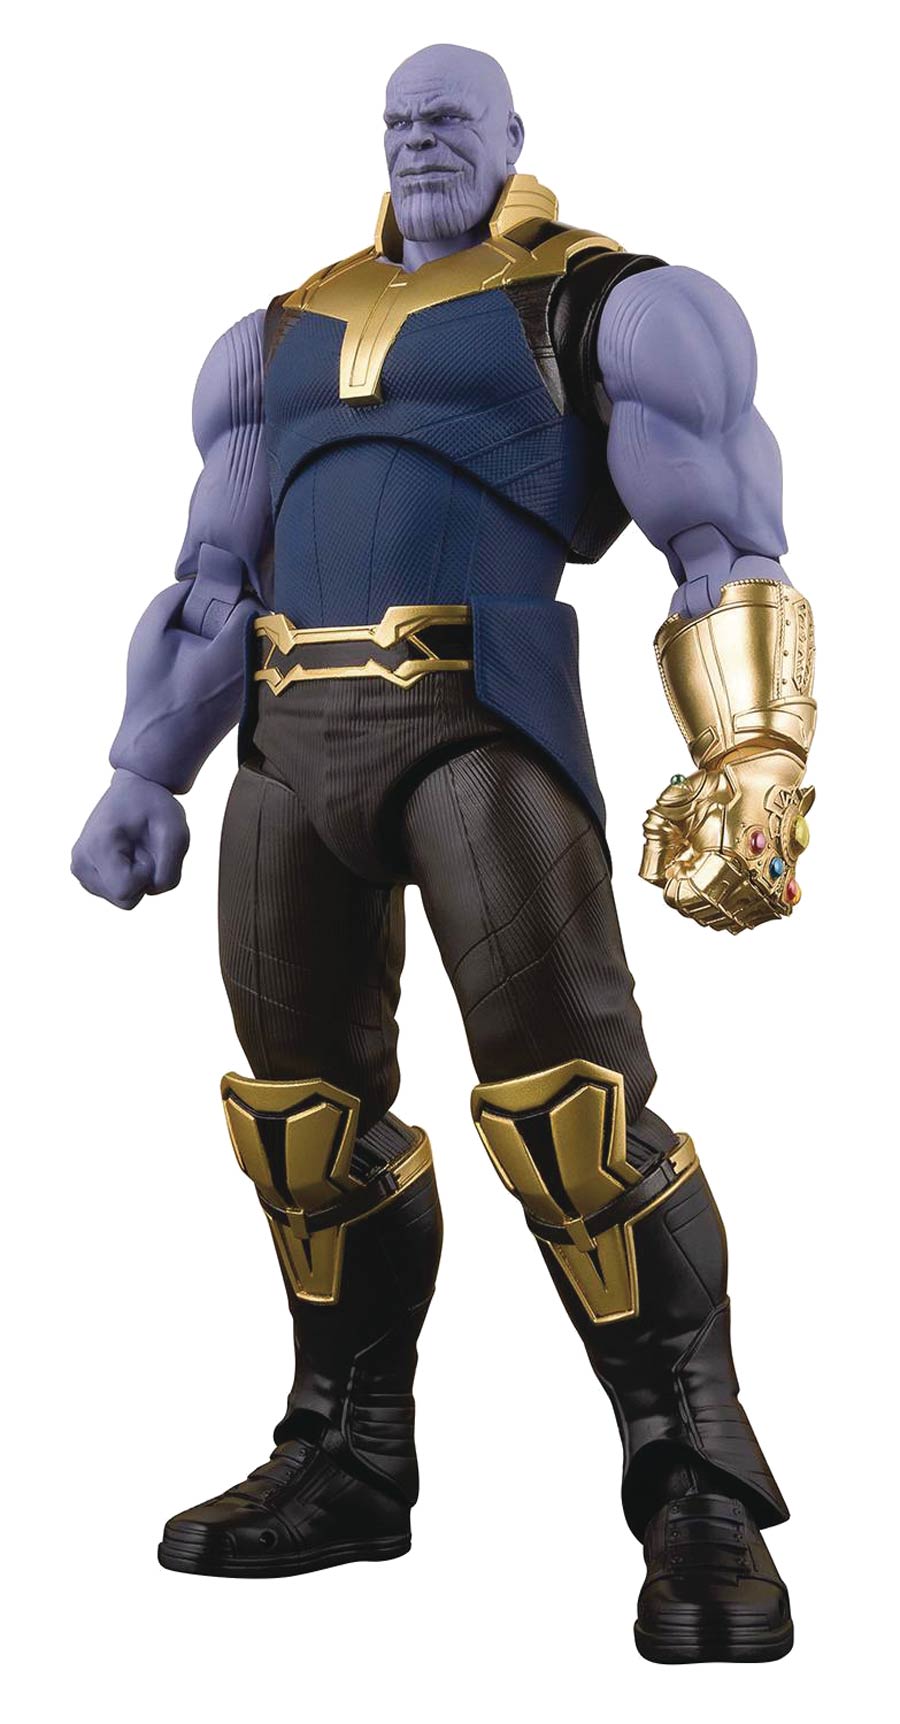 Marvel S.H.Figuarts - Avengers Infinity War - Thanos (Re-Issue) Action Figure